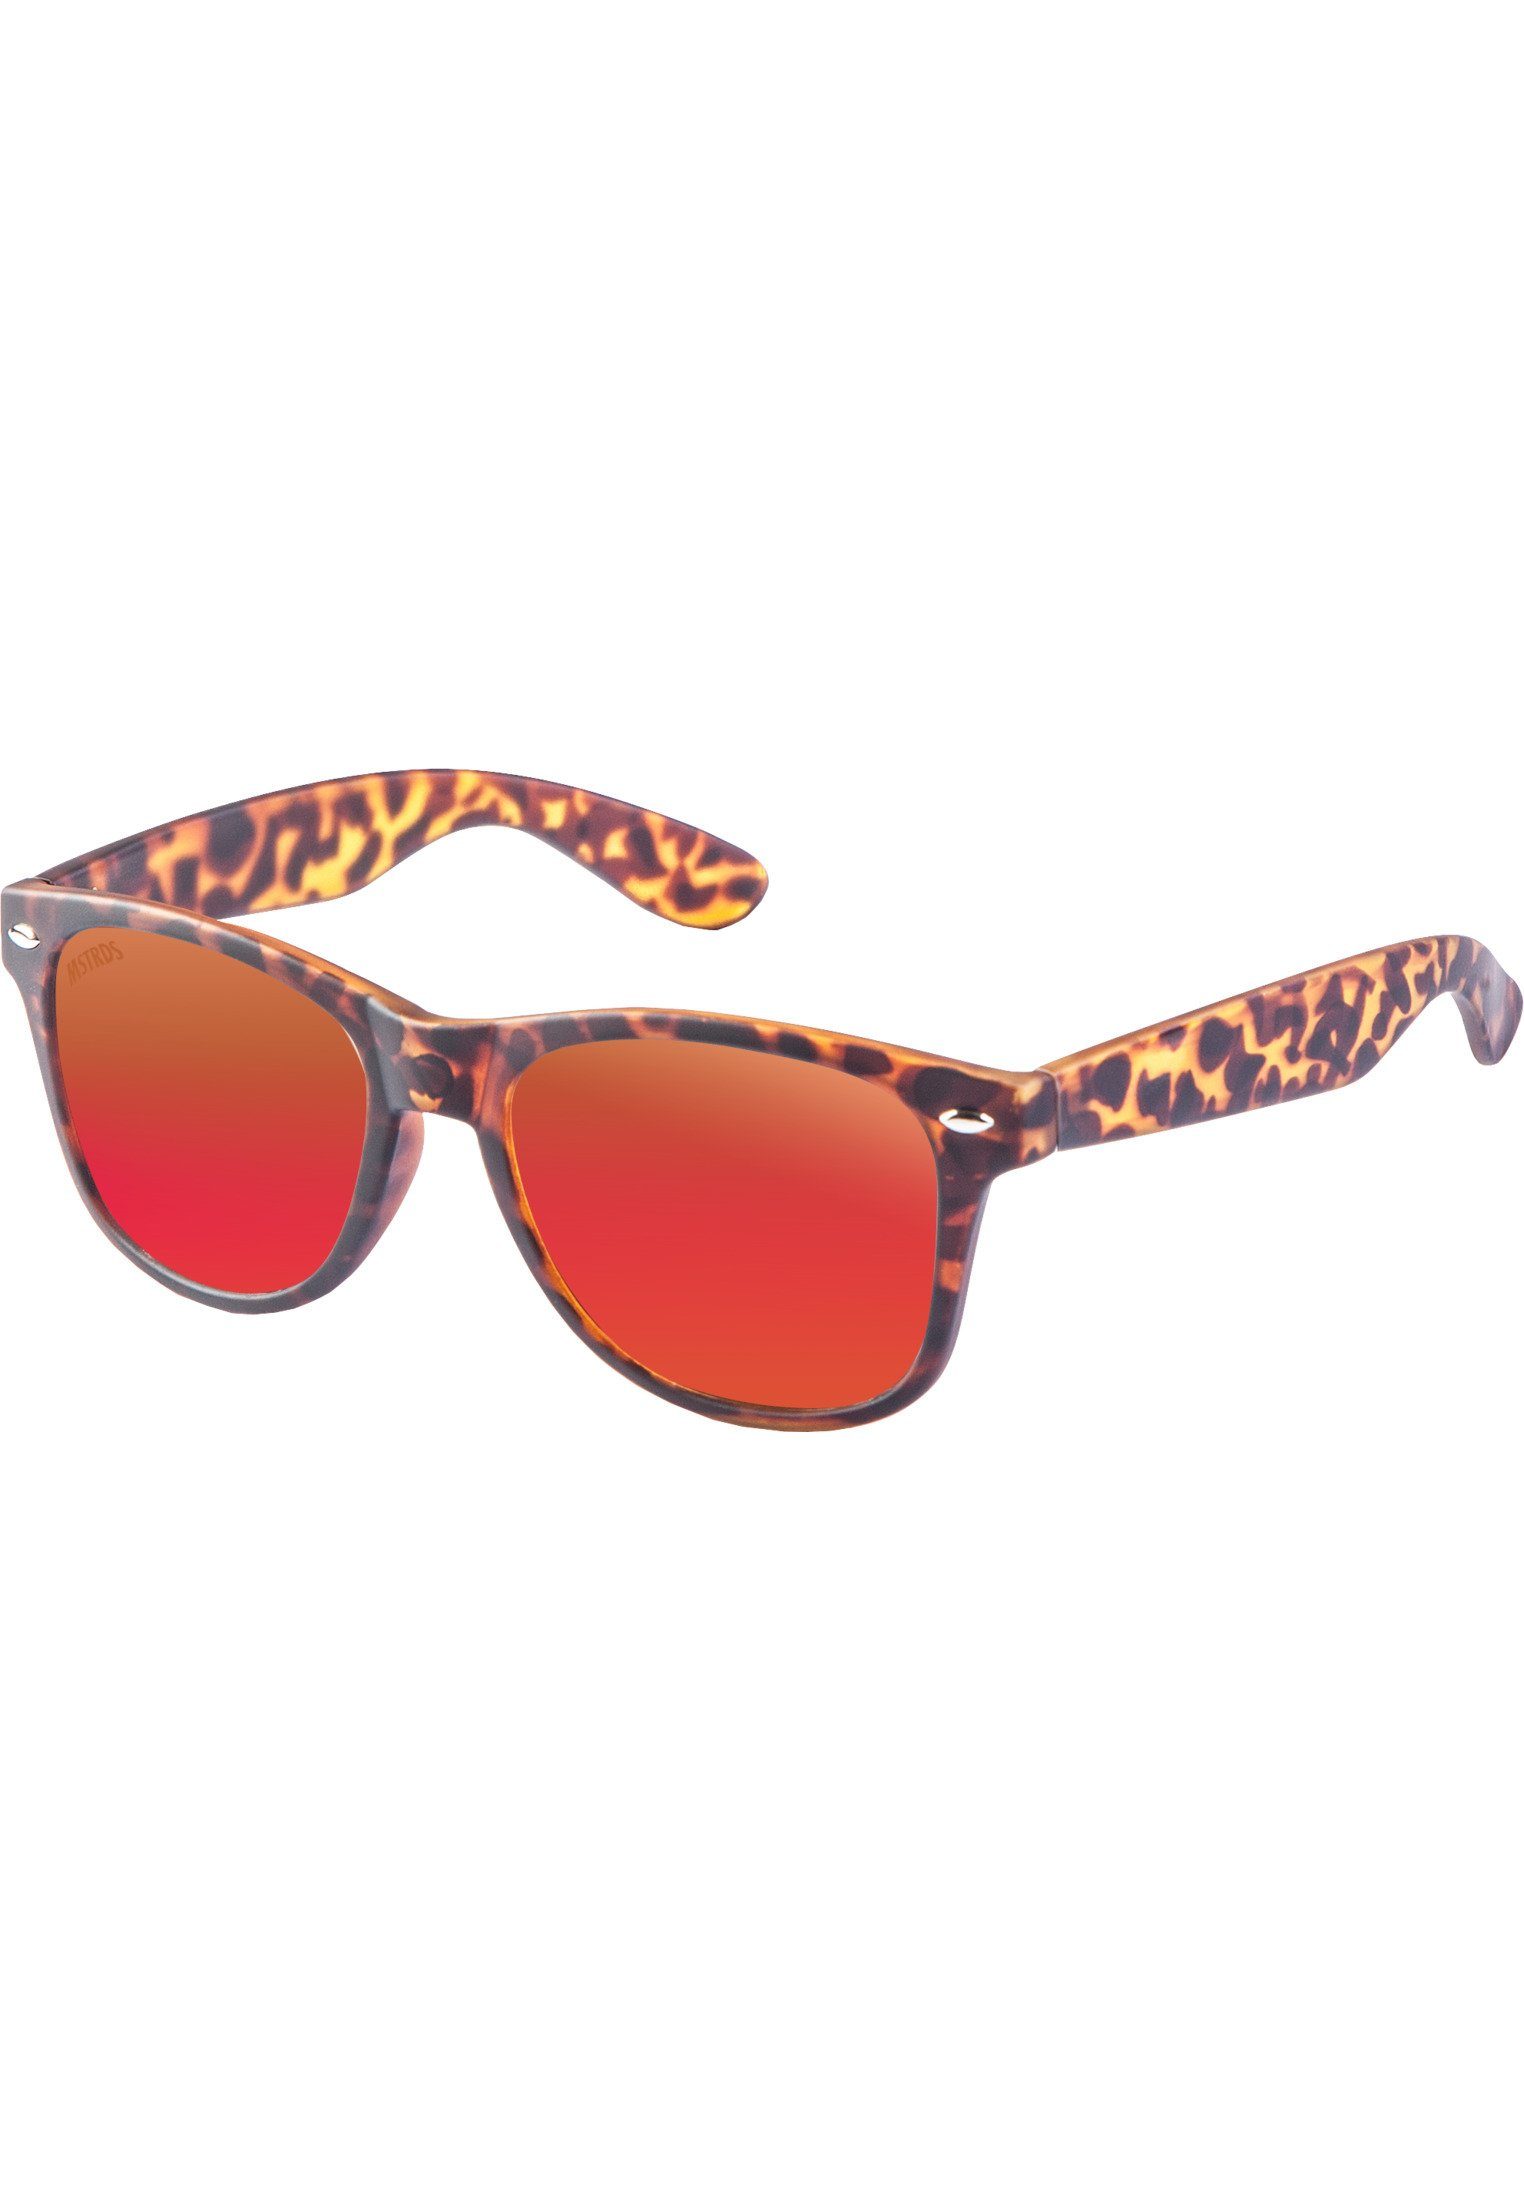 Likoma Sunglasses Accessoires Youth MSTRDS havanna/red Sonnenbrille